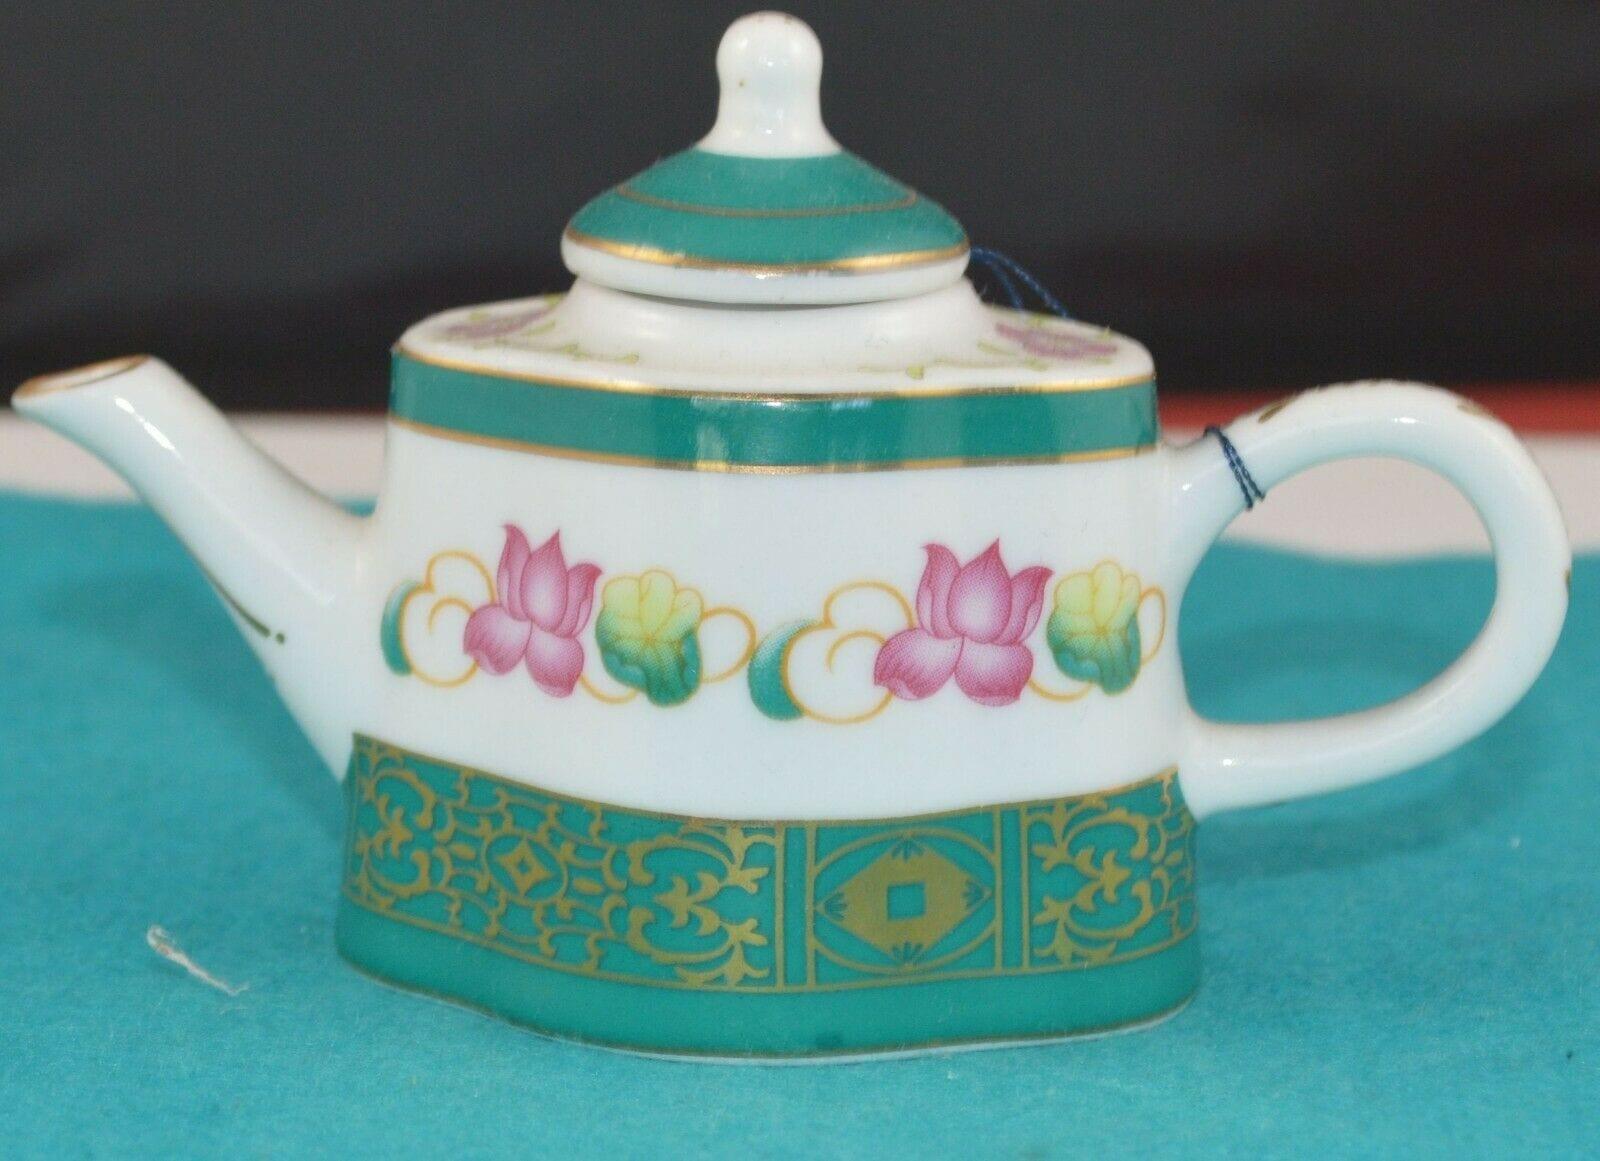 PORCELAIN ART THE MINIATURE TEAPOT COLLECTION WITH GREEN LID AND PINK FLOWERS HAS TAG(PREVIOUSLY OWNED) - TMD167207